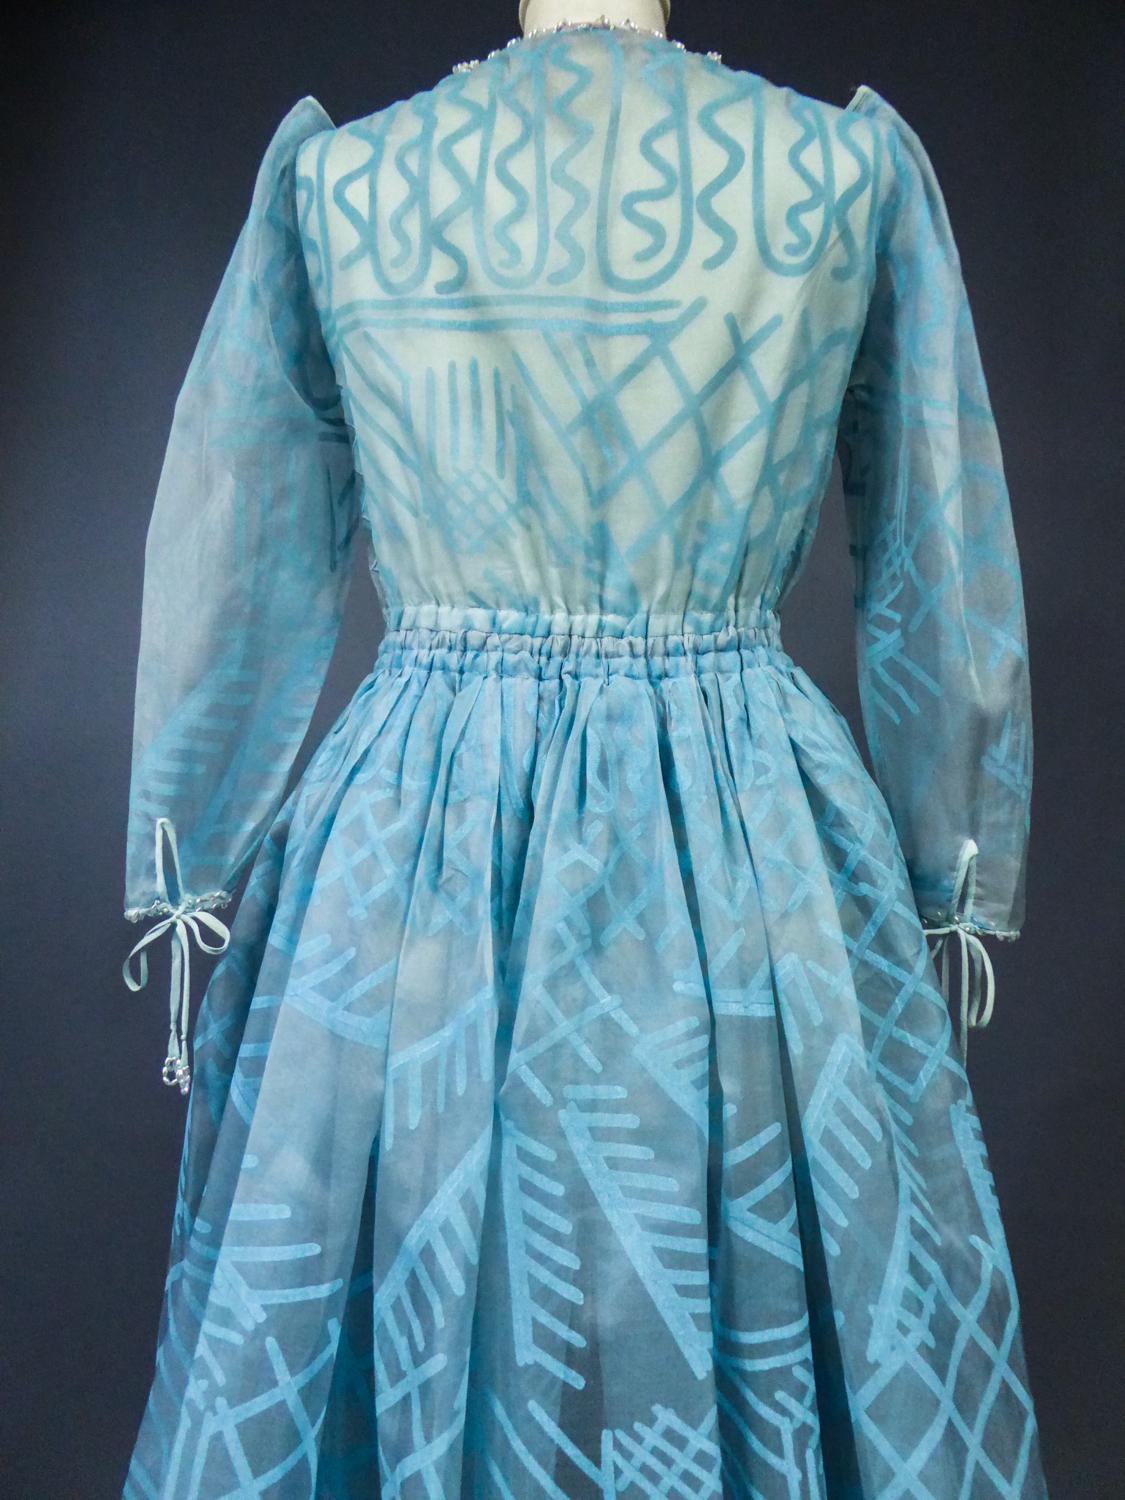 A Zandra Rhodes Evening Dress in Printed Organza - Fortuny Influence- Circa 1980 For Sale 13